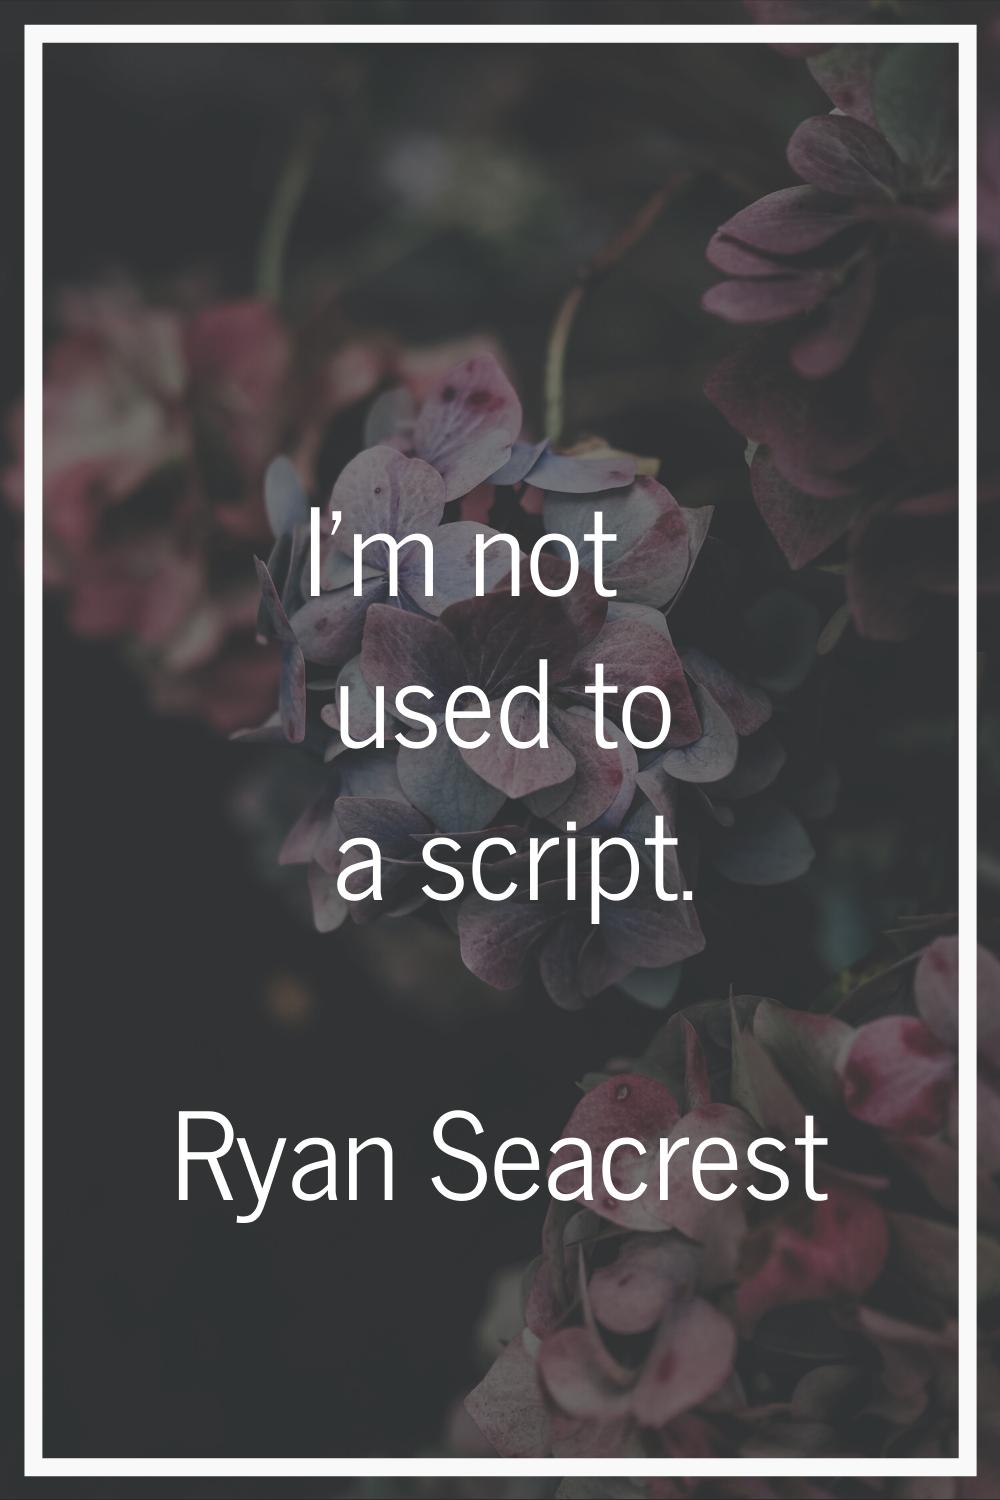 I'm not used to a script.